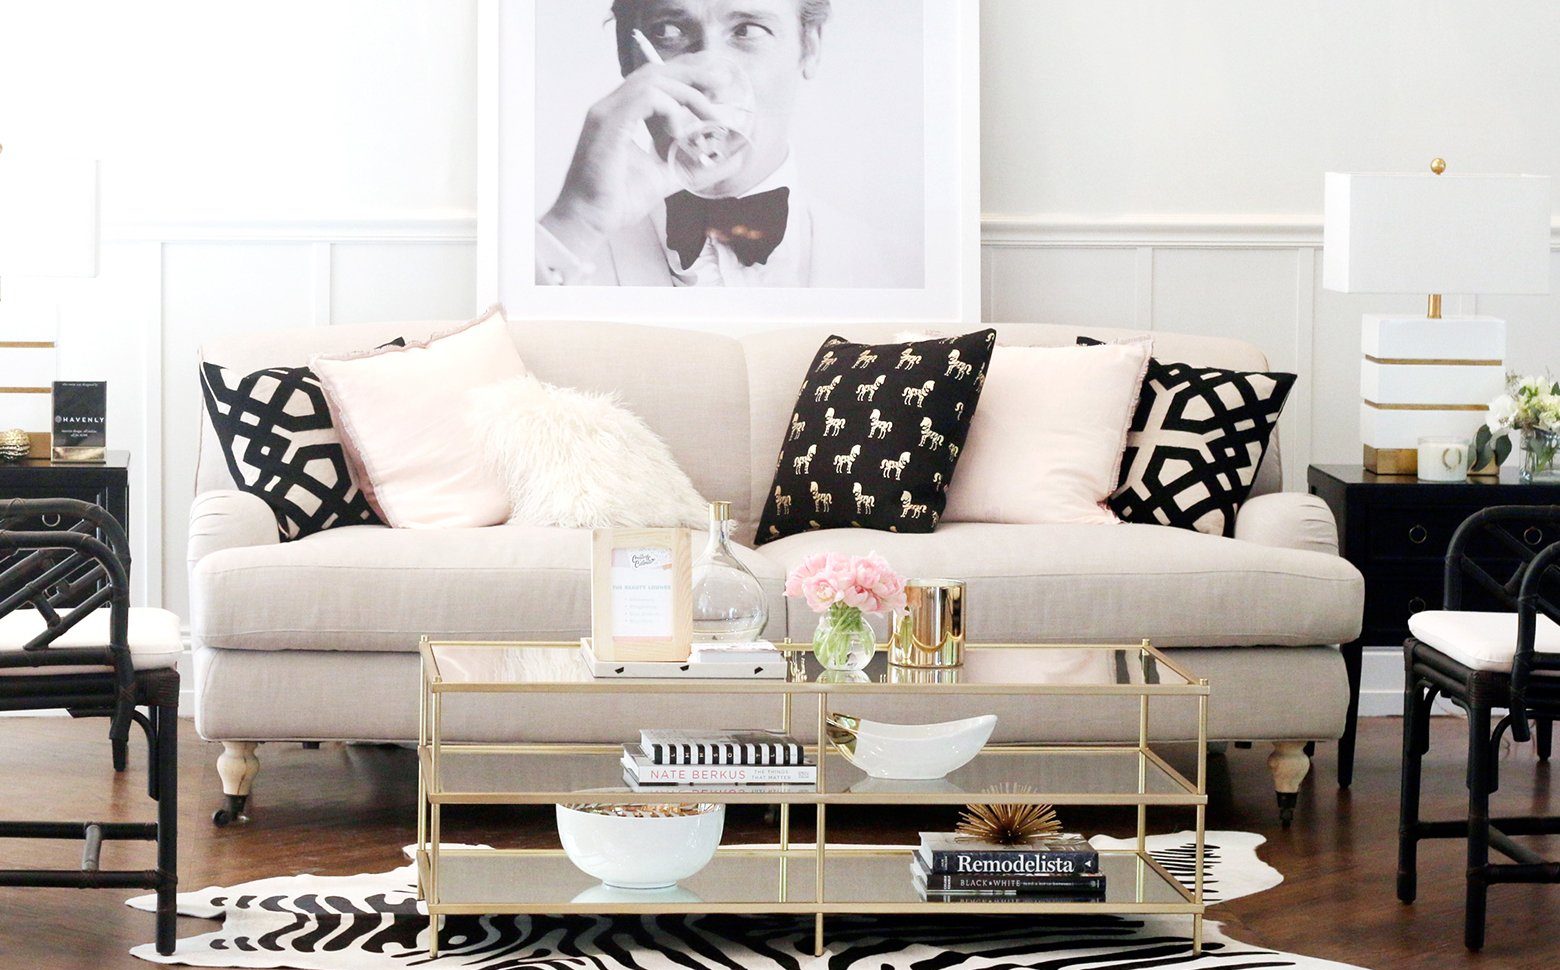 How To Find Your Design Style | The Havenly Blog | Havenly Interior ...